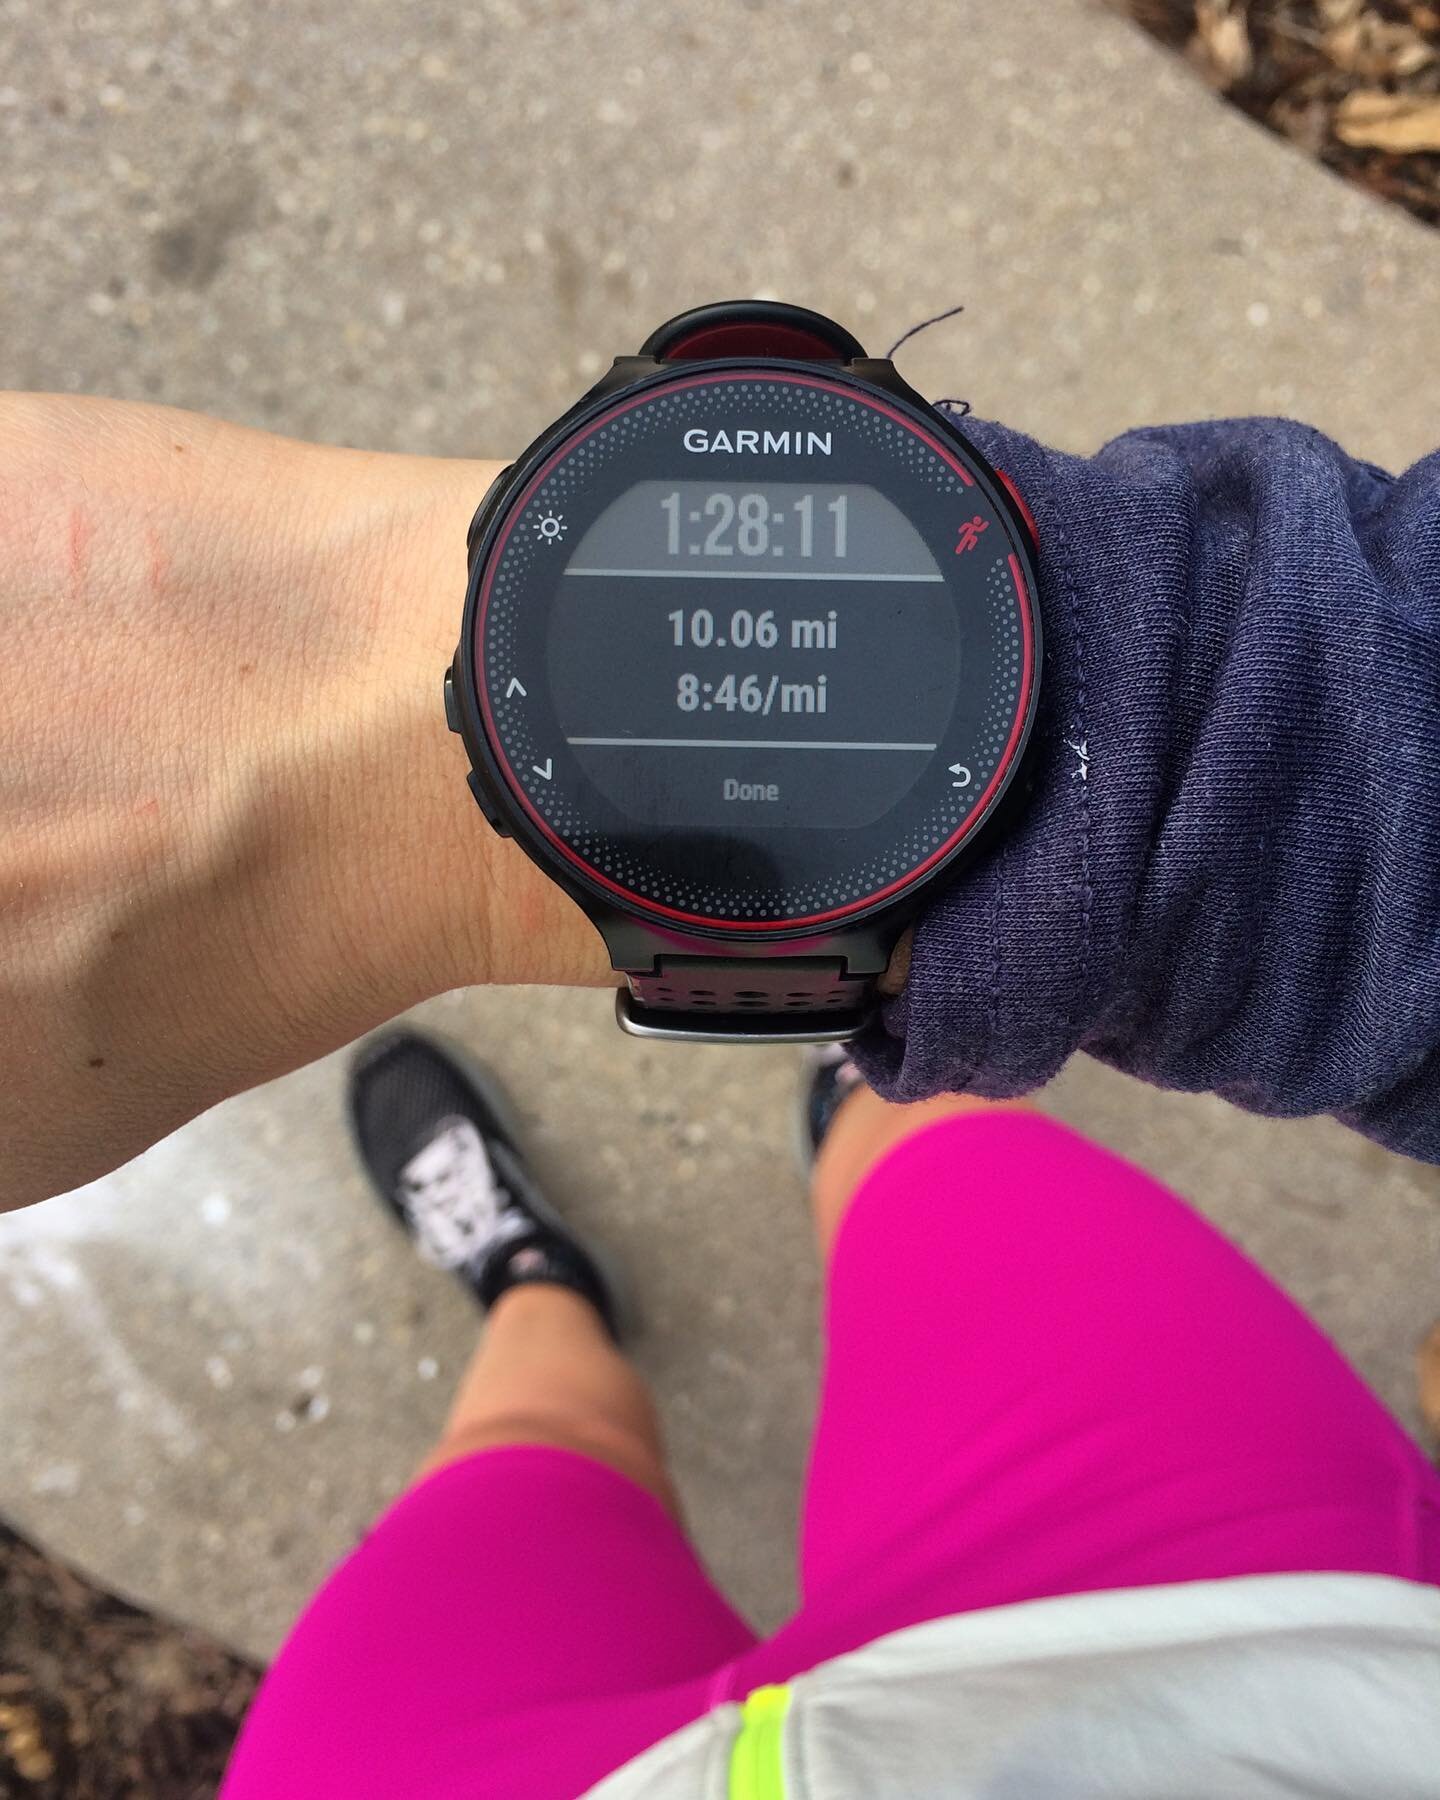 Feeling so far from where I was 👆🏼 but thankful for short, small runs the past couple of weeks. I&rsquo;ve been able to run 4-6 miles with no pain and for that, I am SO thankful. It&rsquo;s been a long 6 weeks or so of no running and now, being abl